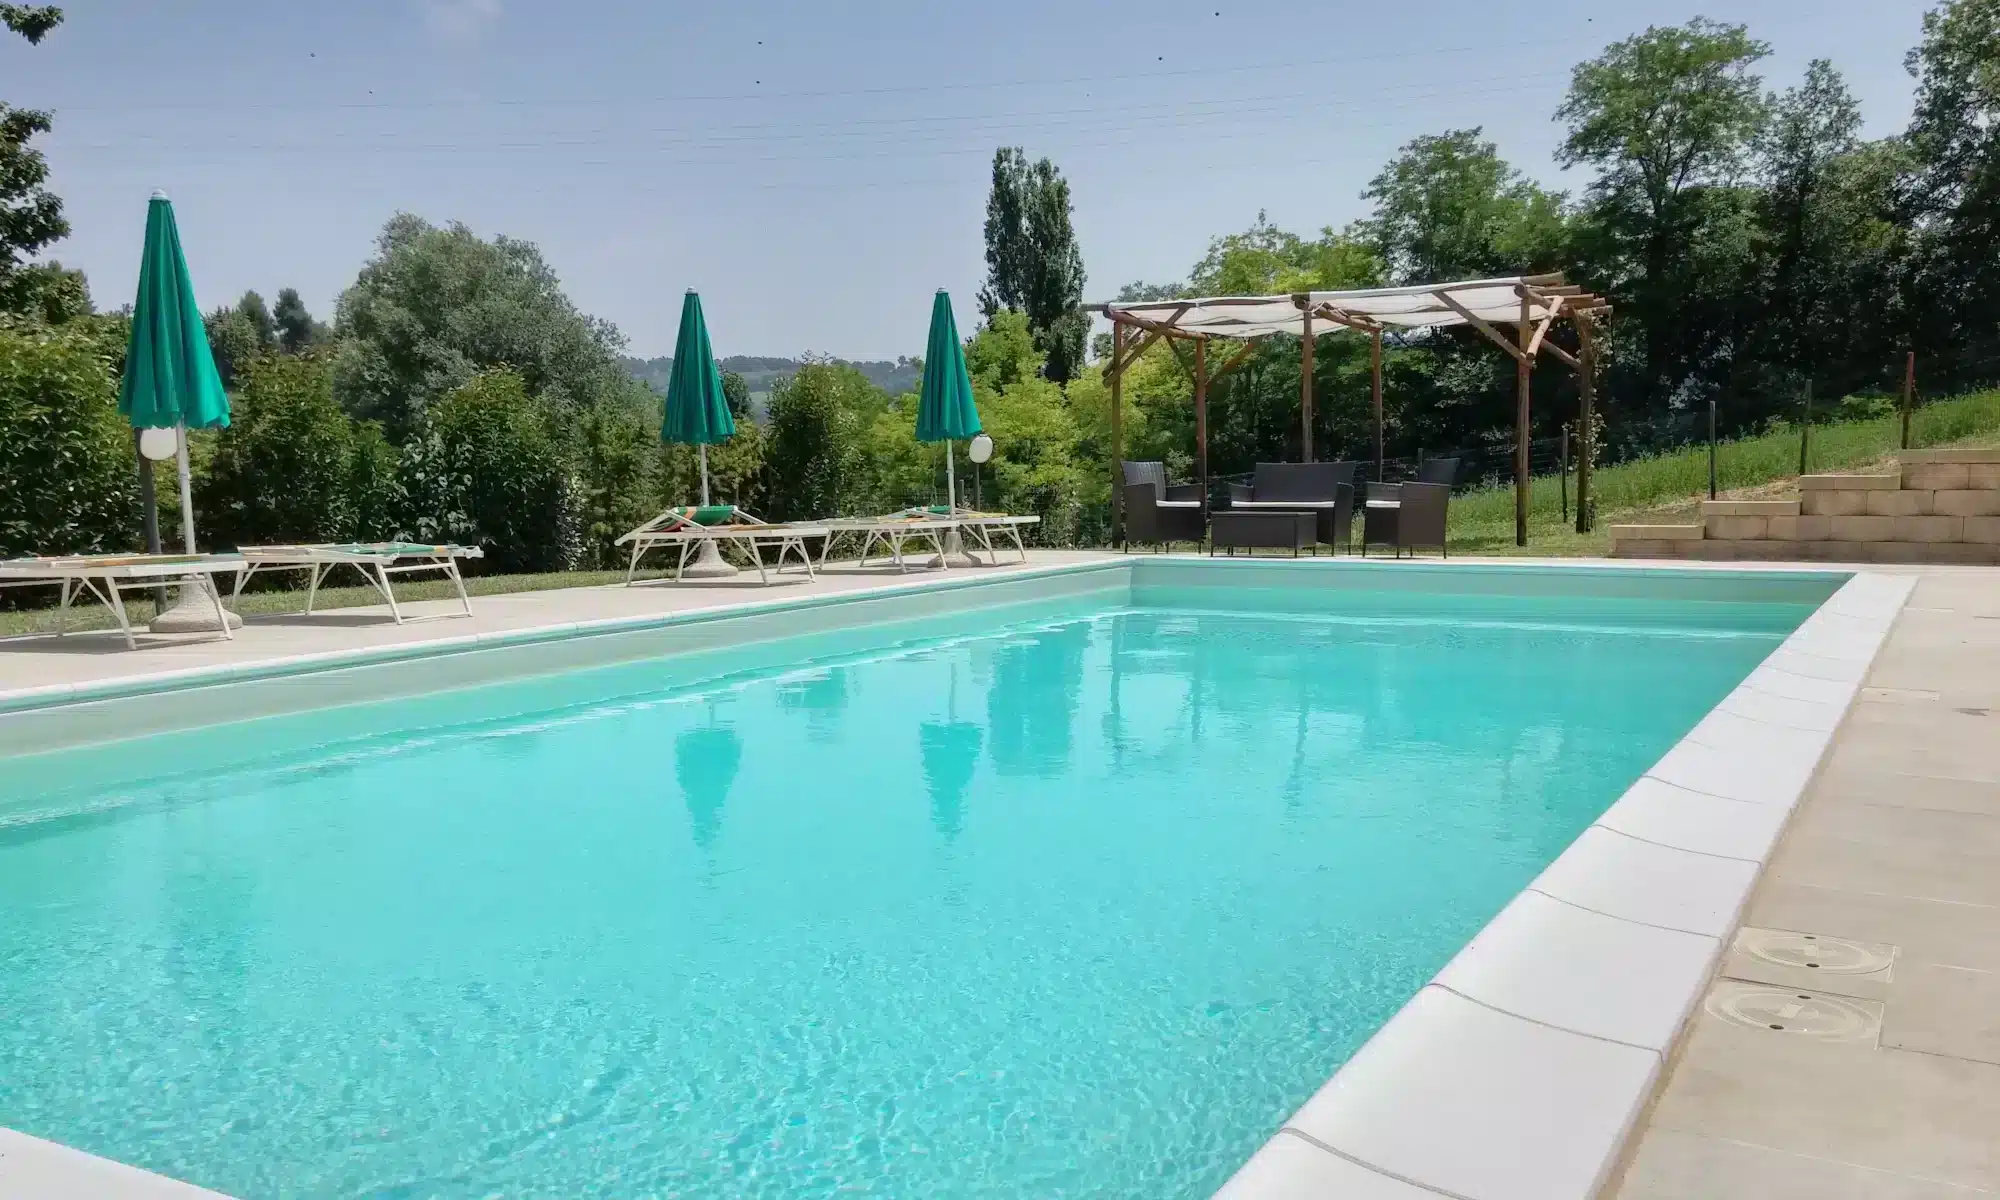 View of the outdoor pool ready to cool off while you stay at the Ca' Princivalle Farmhouse